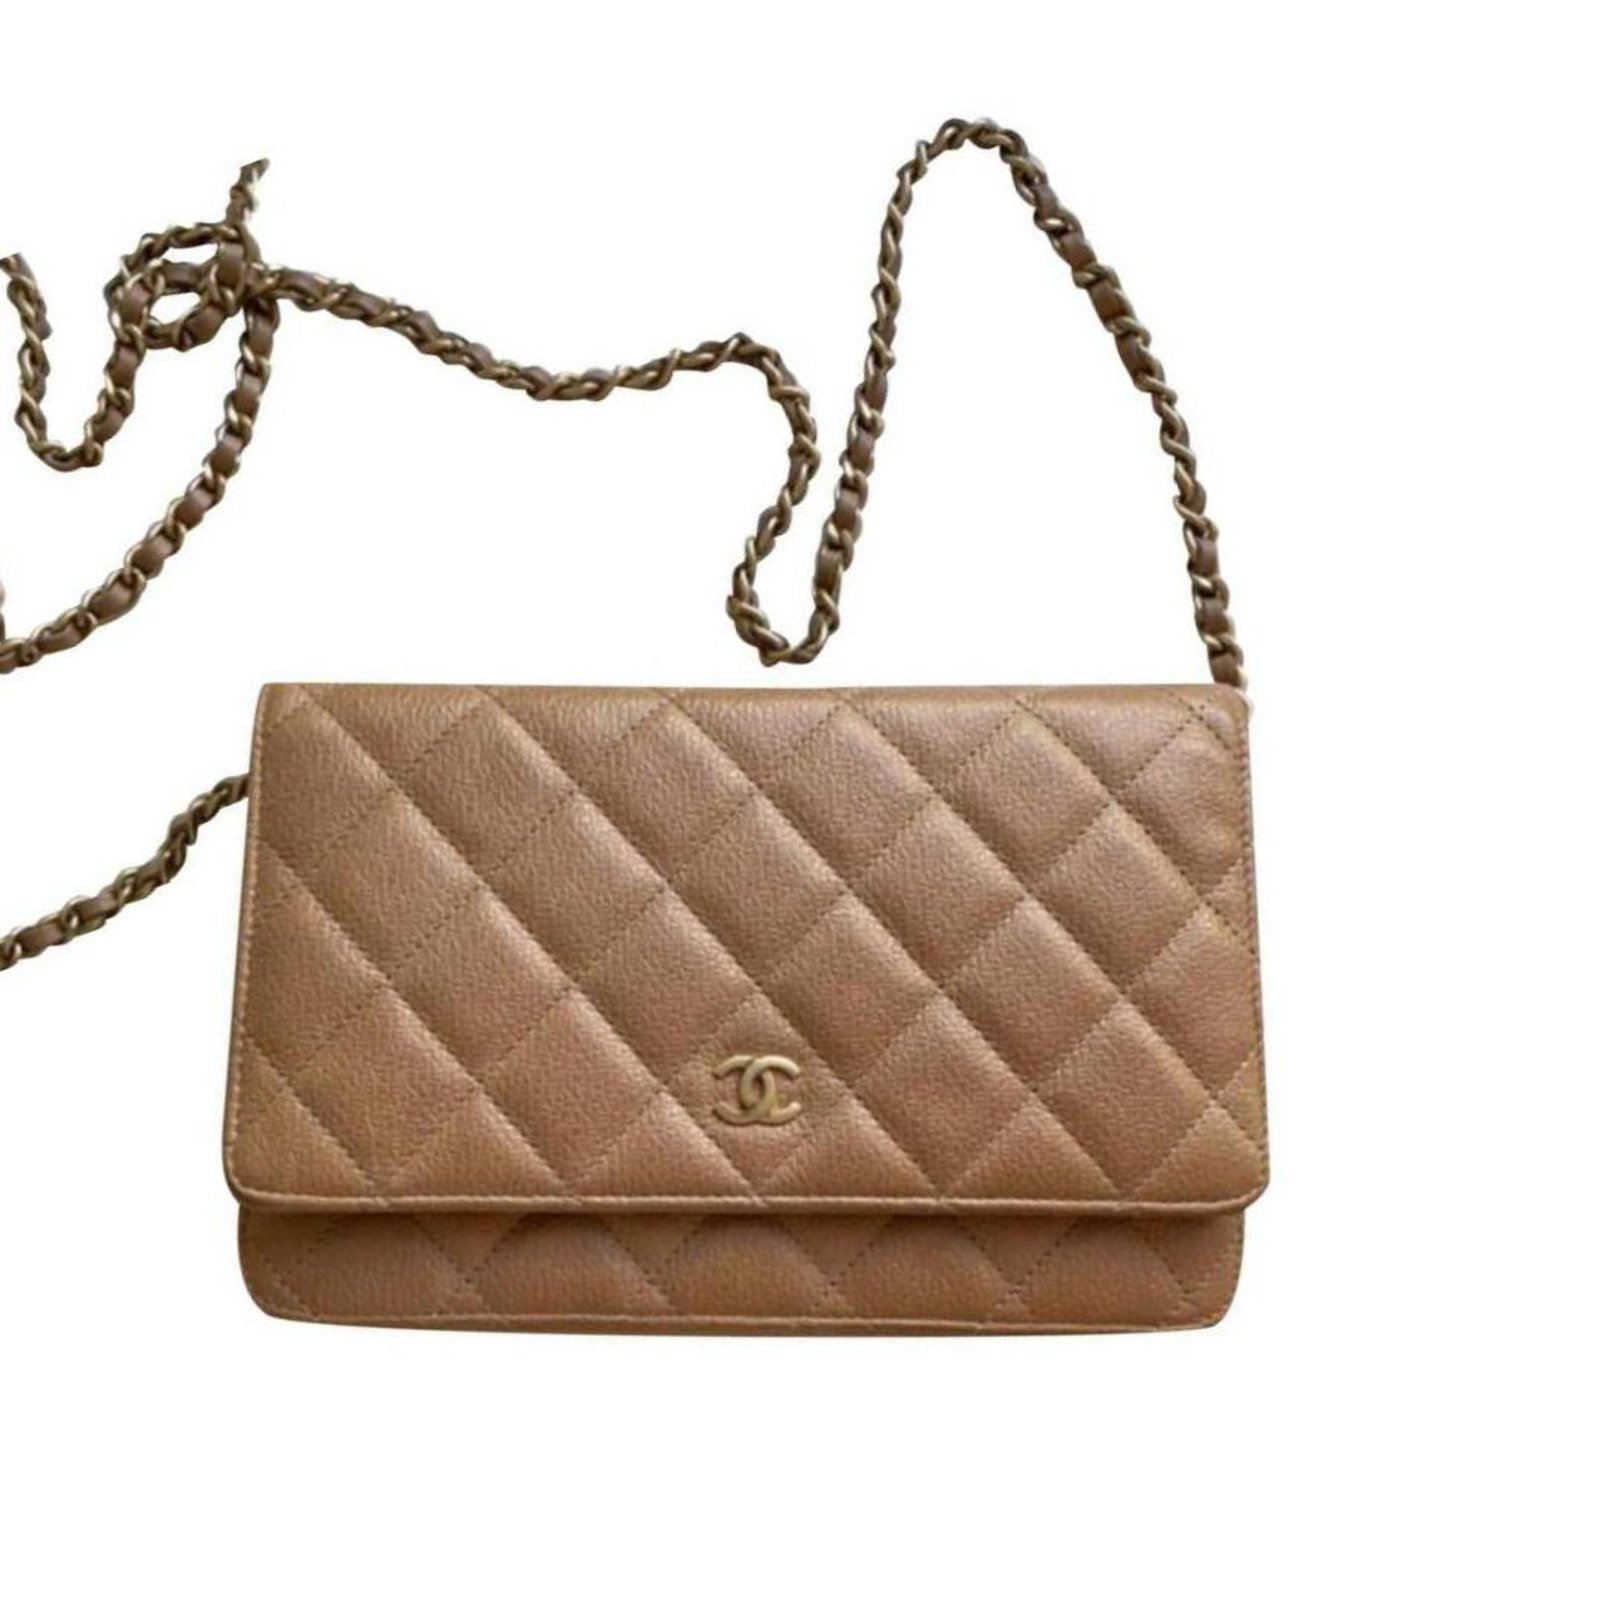 Chanel WOC Wallet on Chain Chanel Print Bag Beige Caramel Gold hardware Leather ref.321644 - Closet